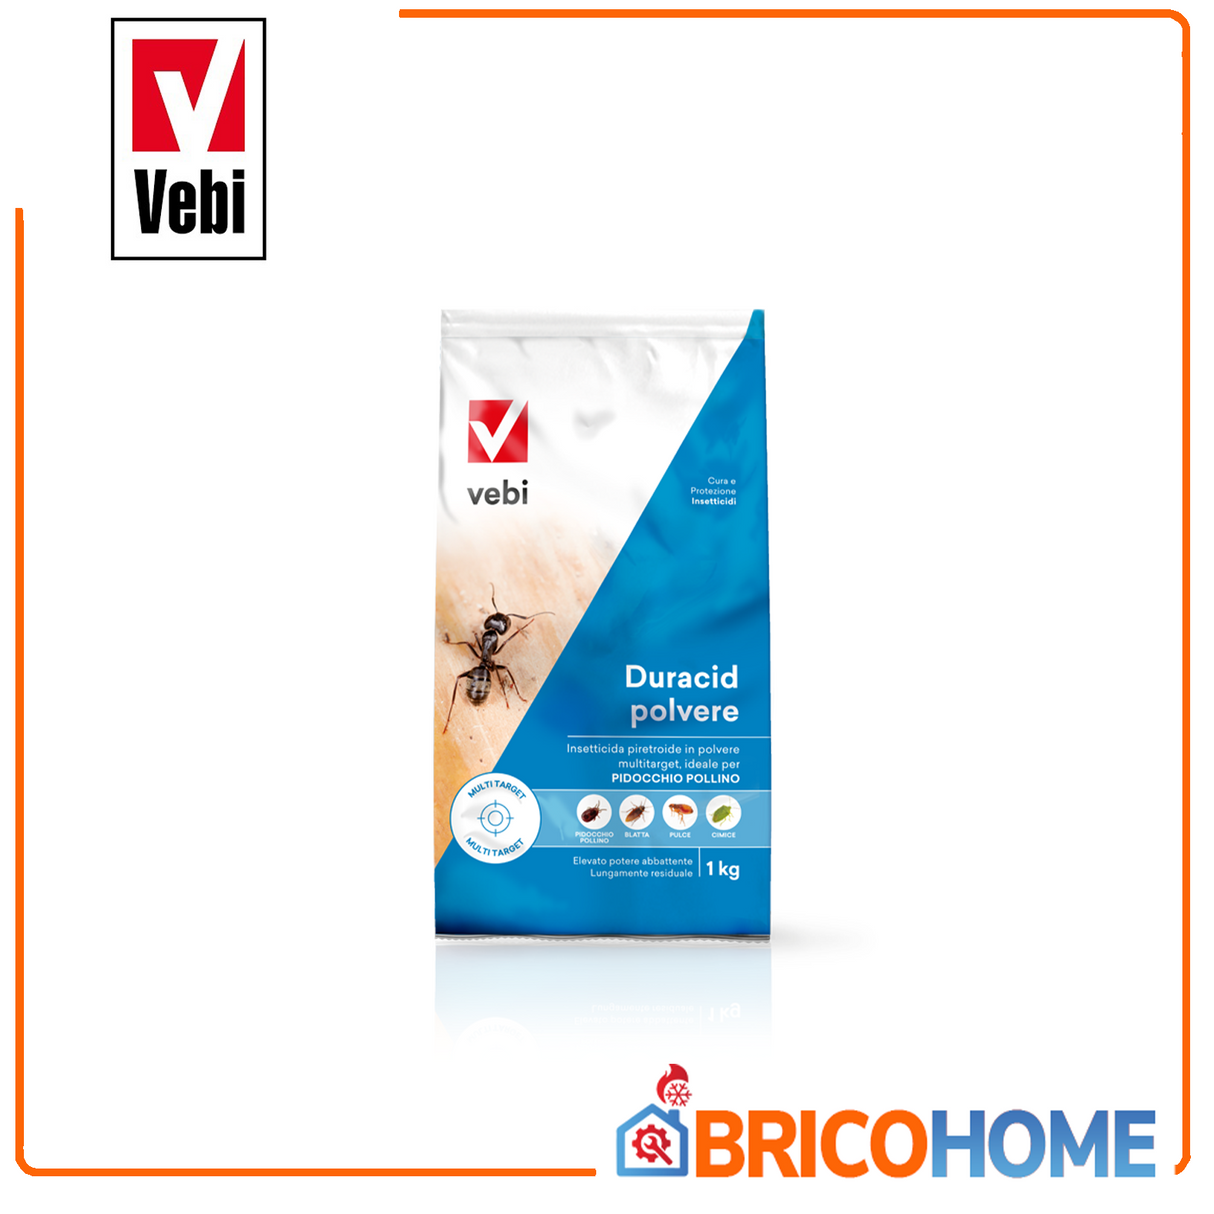 DURACID VEBI ready-to-use powdered pyrethroid insecticide 